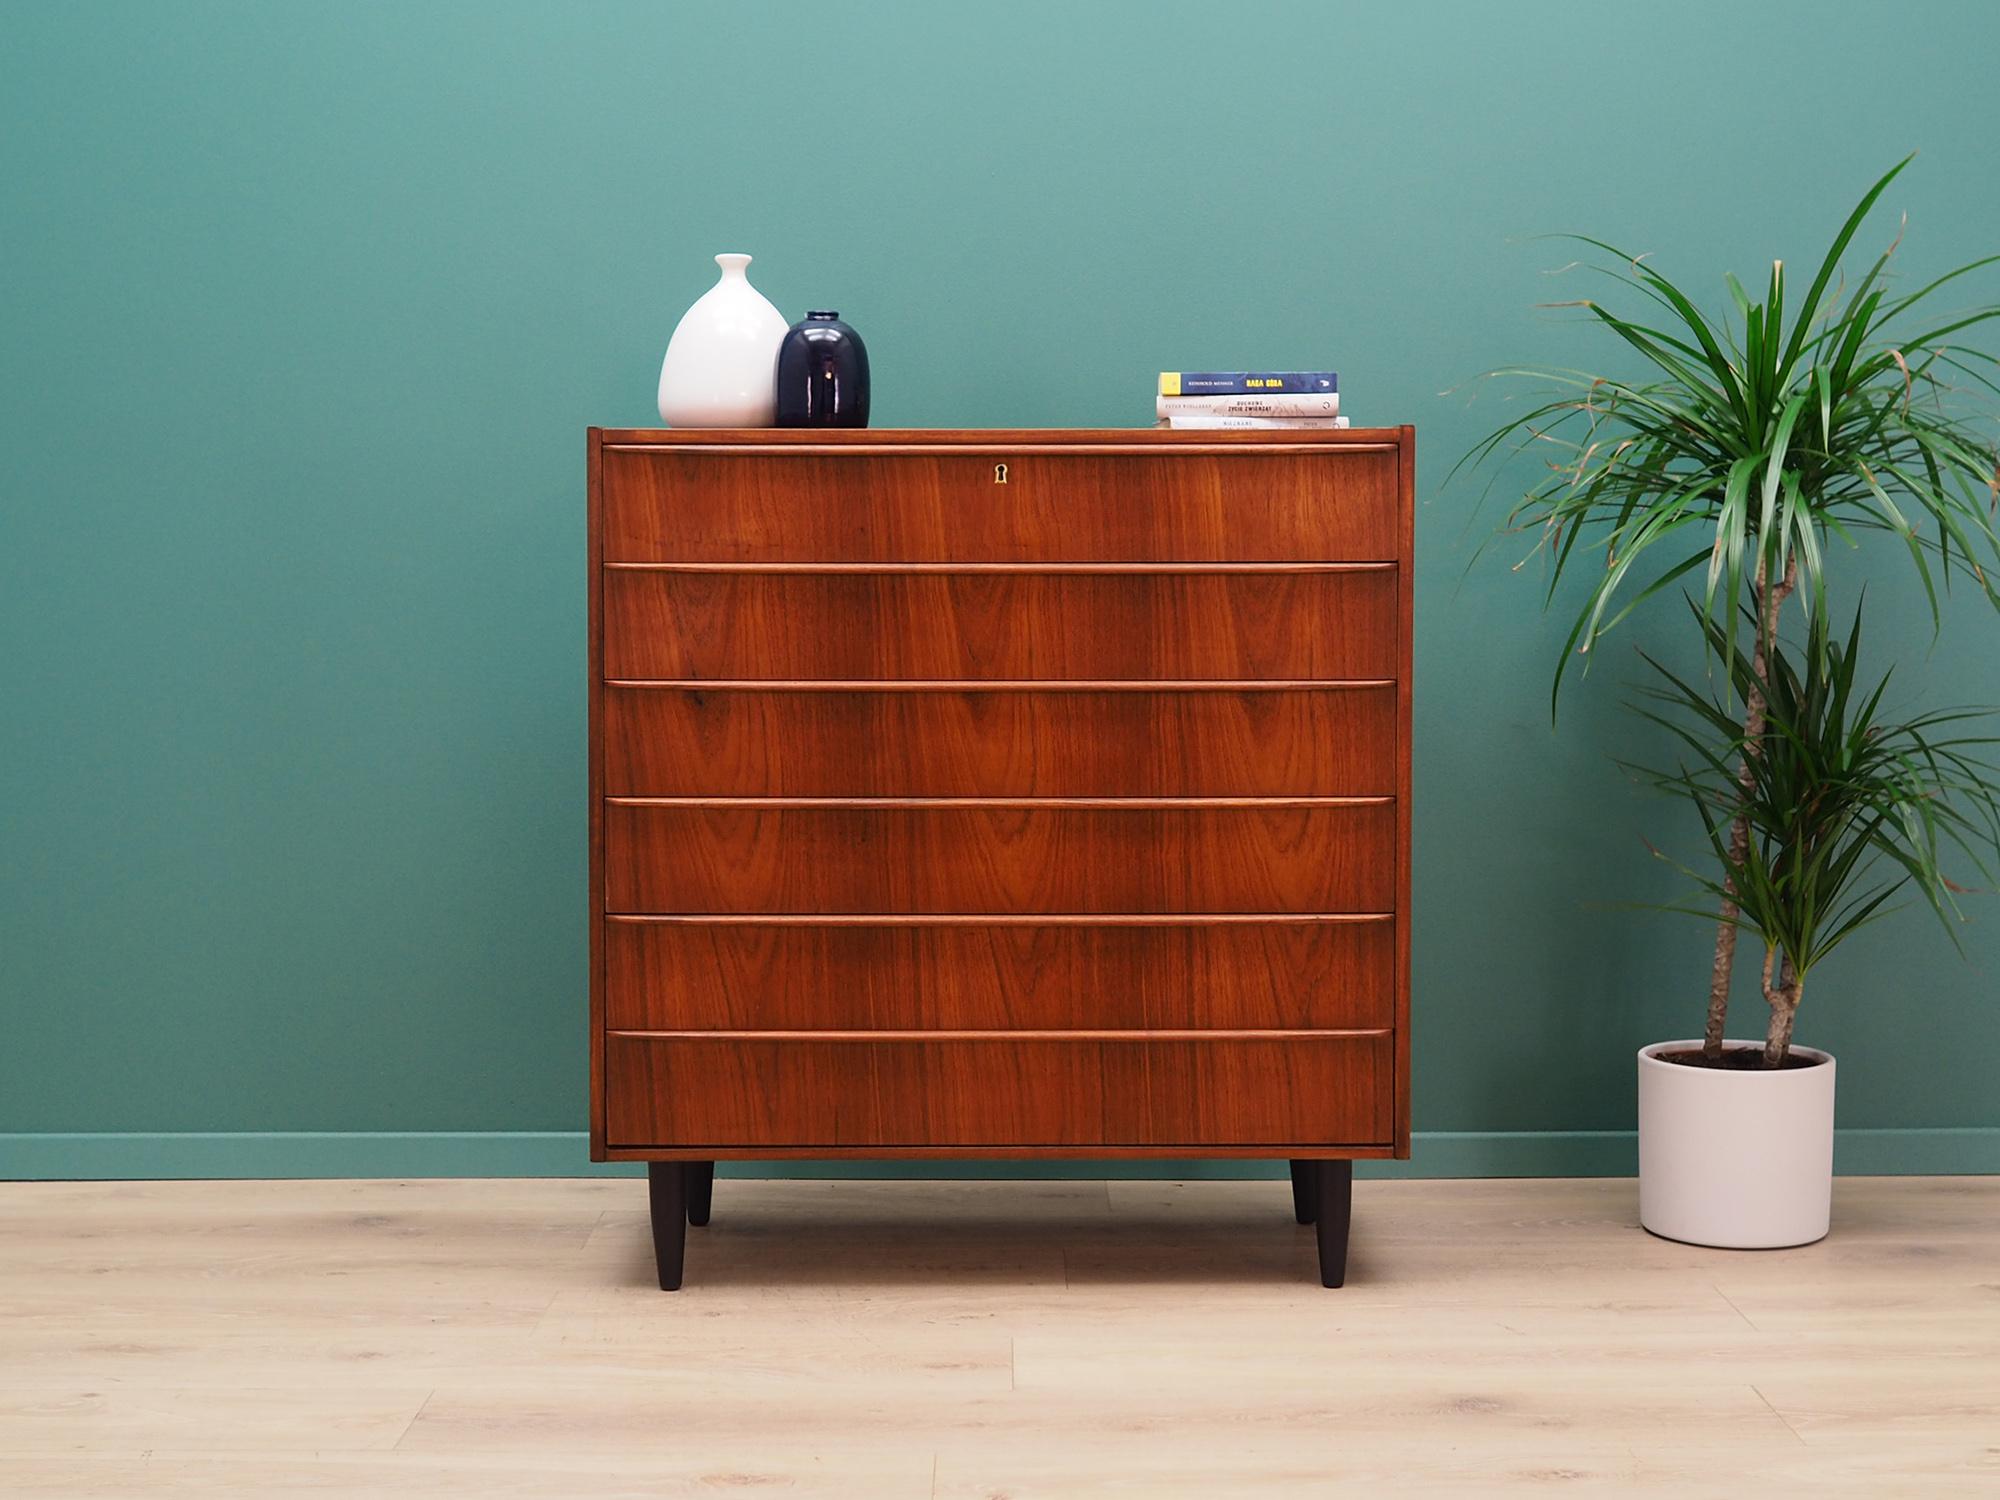 Fantastic chest of drawers from the 1960s-1970s. Scandinavian design, Minimalist form. The furniture is covered with teak veneer, legs are made of solid teak wood. The chest has six spacious drawers, no key included. Preserved in good condition